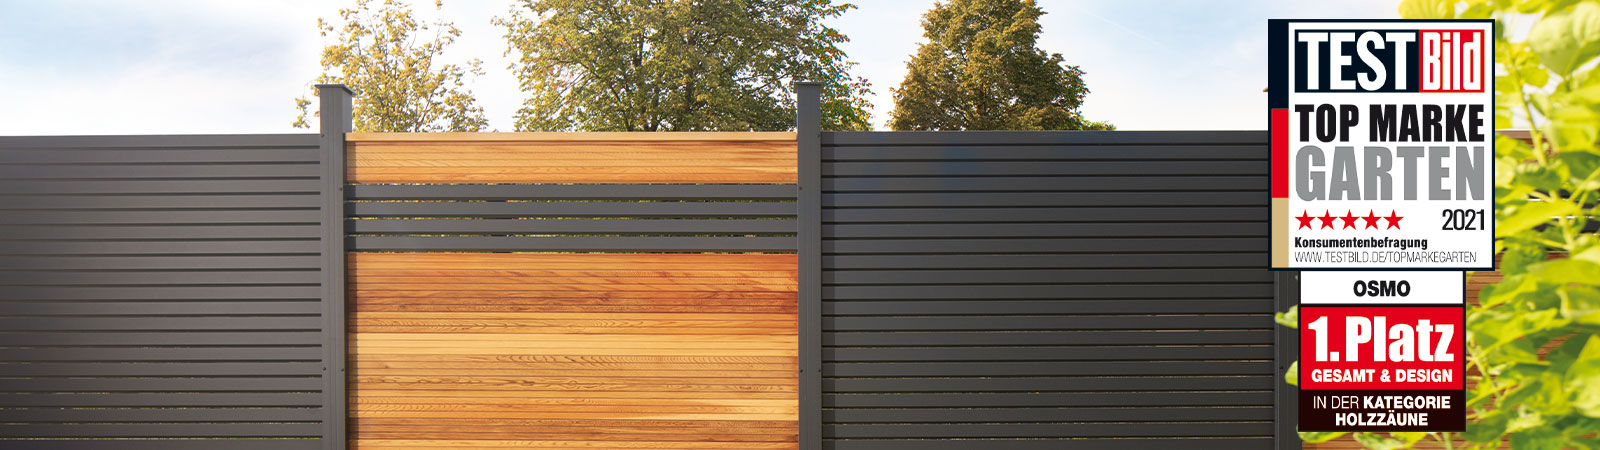 Enjoy more privacy with Osmo screens and fencing like Osmo Bella Vista 2.0